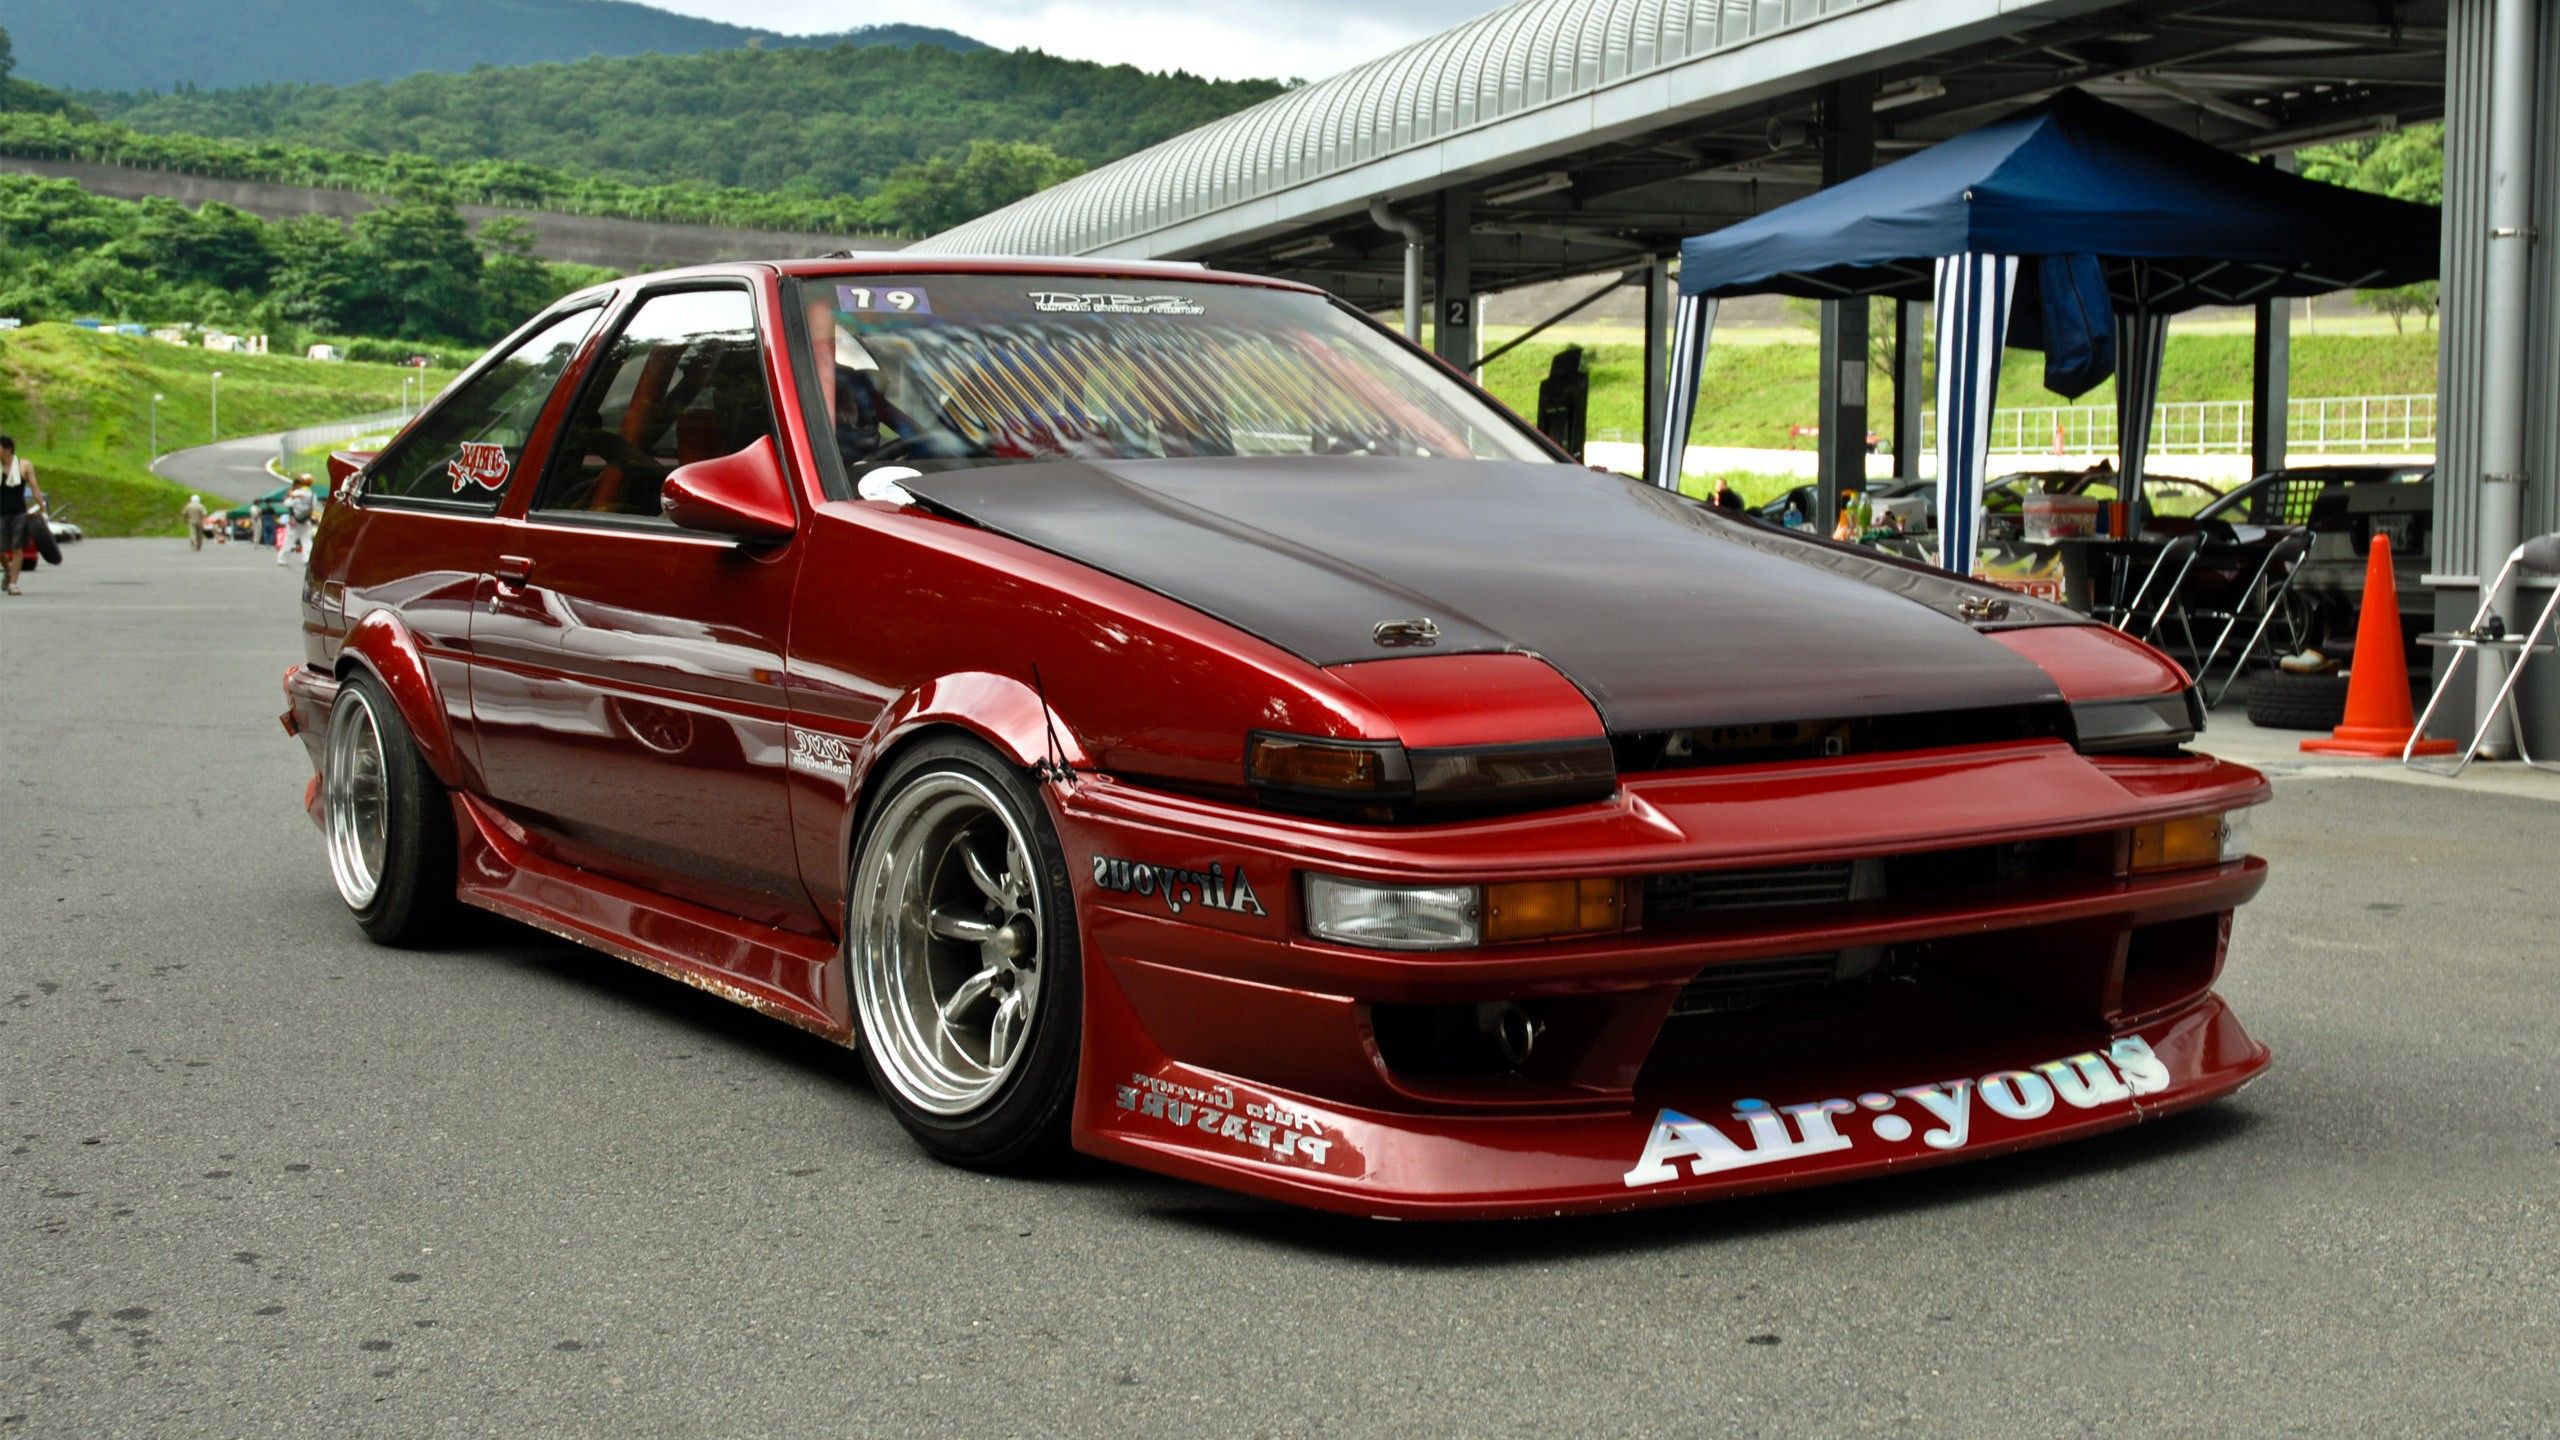 AE86 Wallpaper for you guys